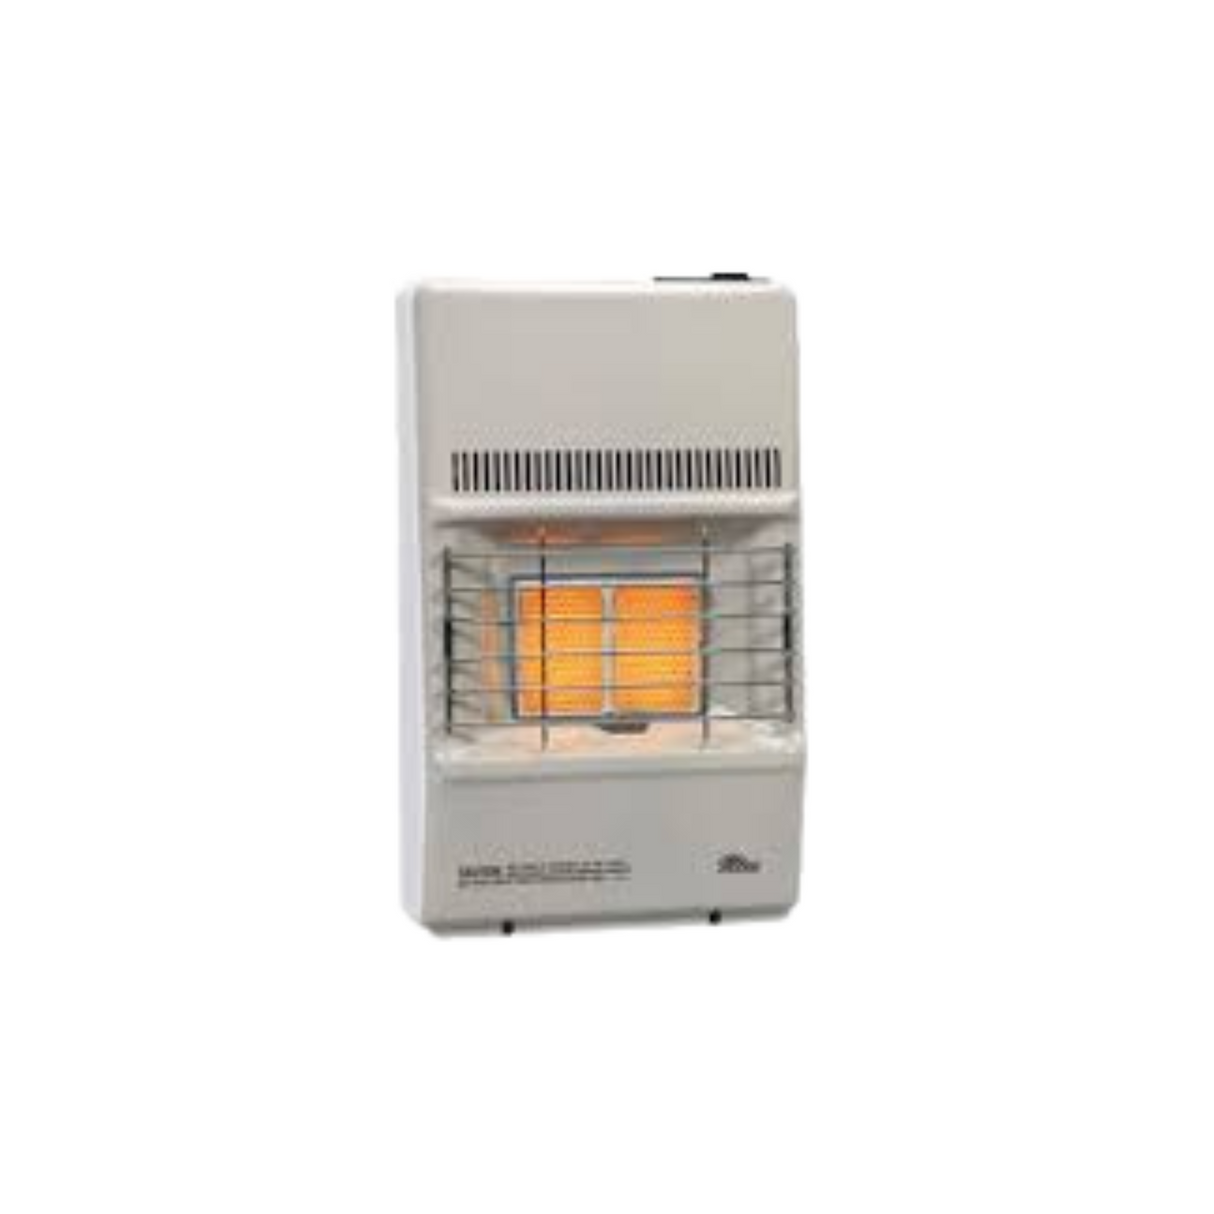 Sunstar Heating Products SC10M-N 9500 BTU Vent Free Infrared/Radiant Heater, Natural Gas